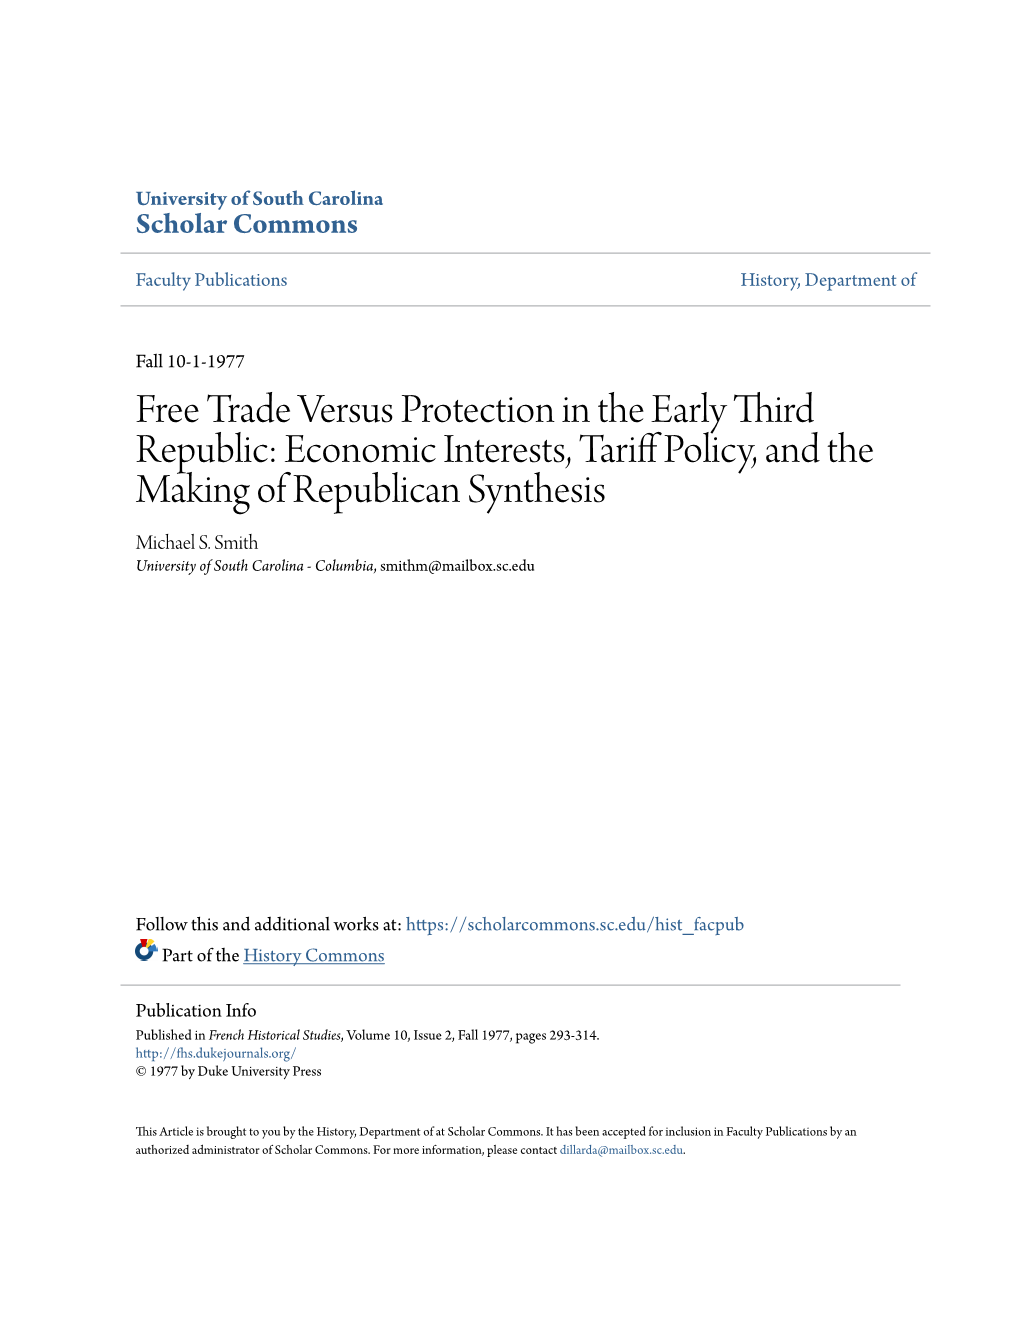 Free Trade Versus Protection in the Early Third Republic: Economic Interests, Tariff Olicp Y, and the Making of Republican Synthesis Michael S